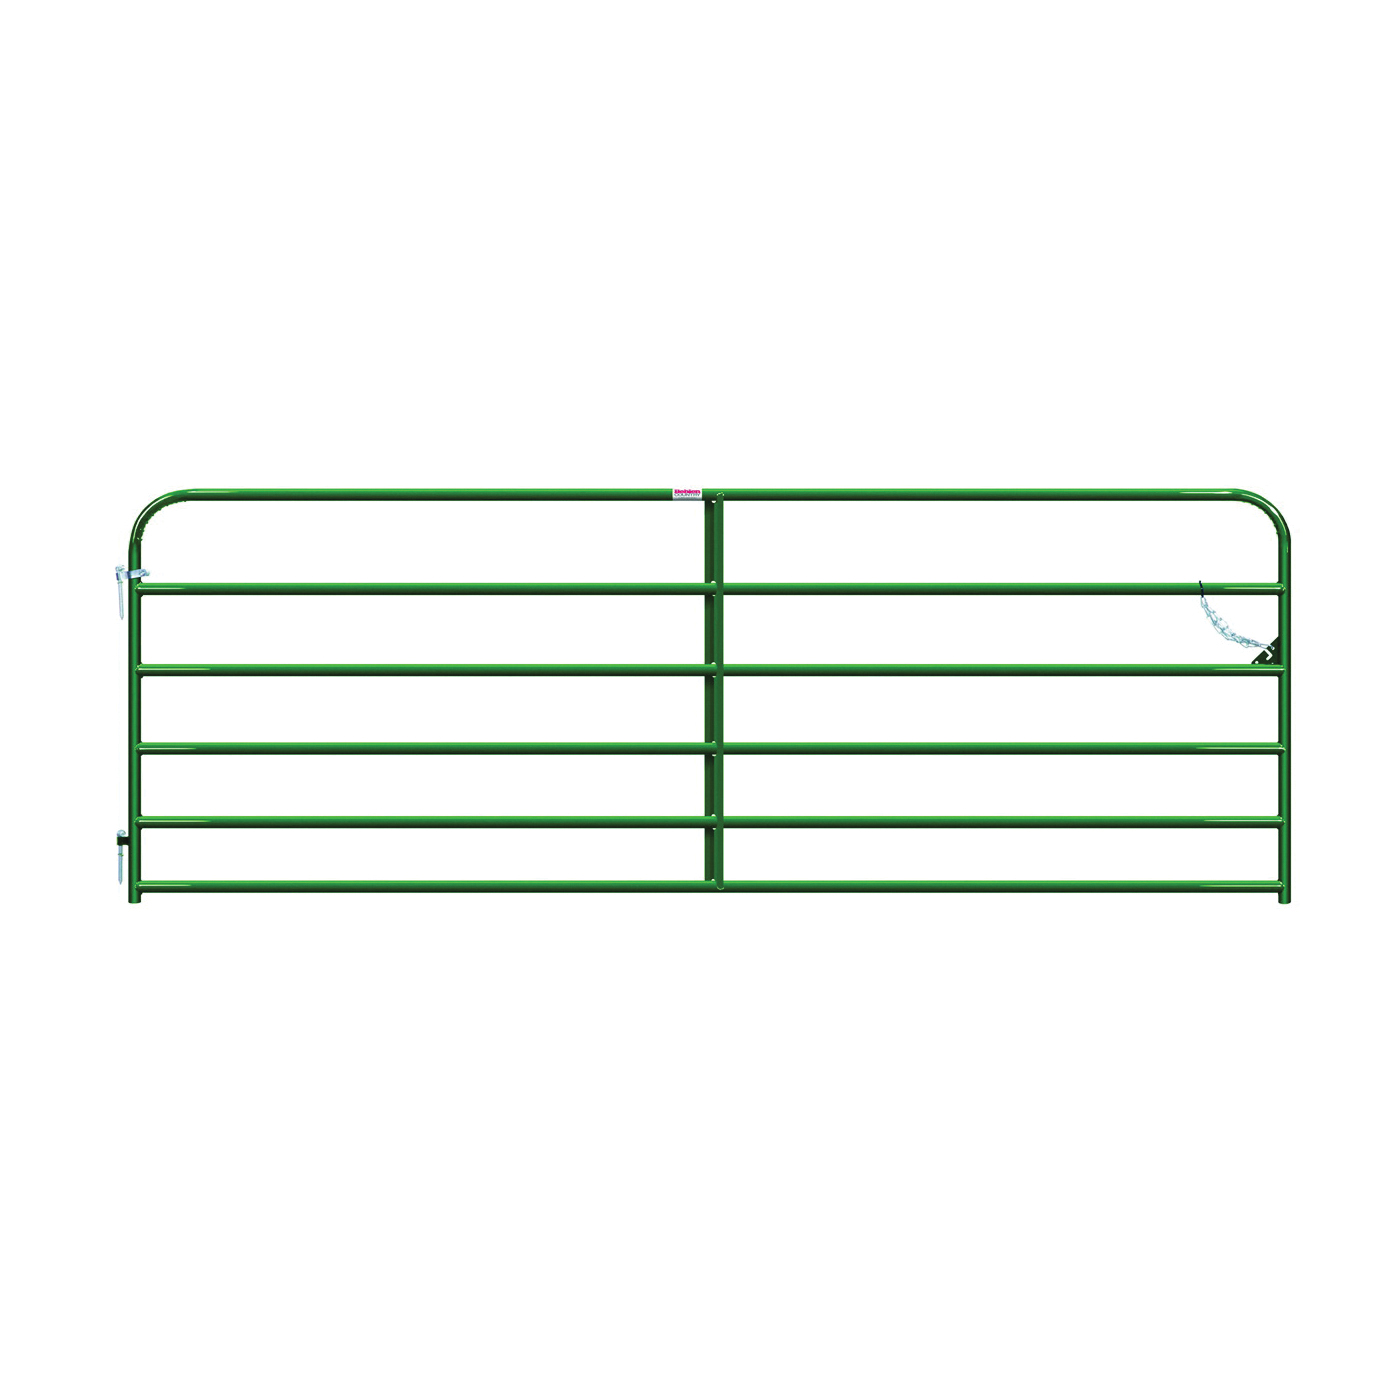 Behlen Country 40130122 Utility Gate, 12 ft W Gate, 50 in H Gate, 20 ga Frame Tube/Channel, Green